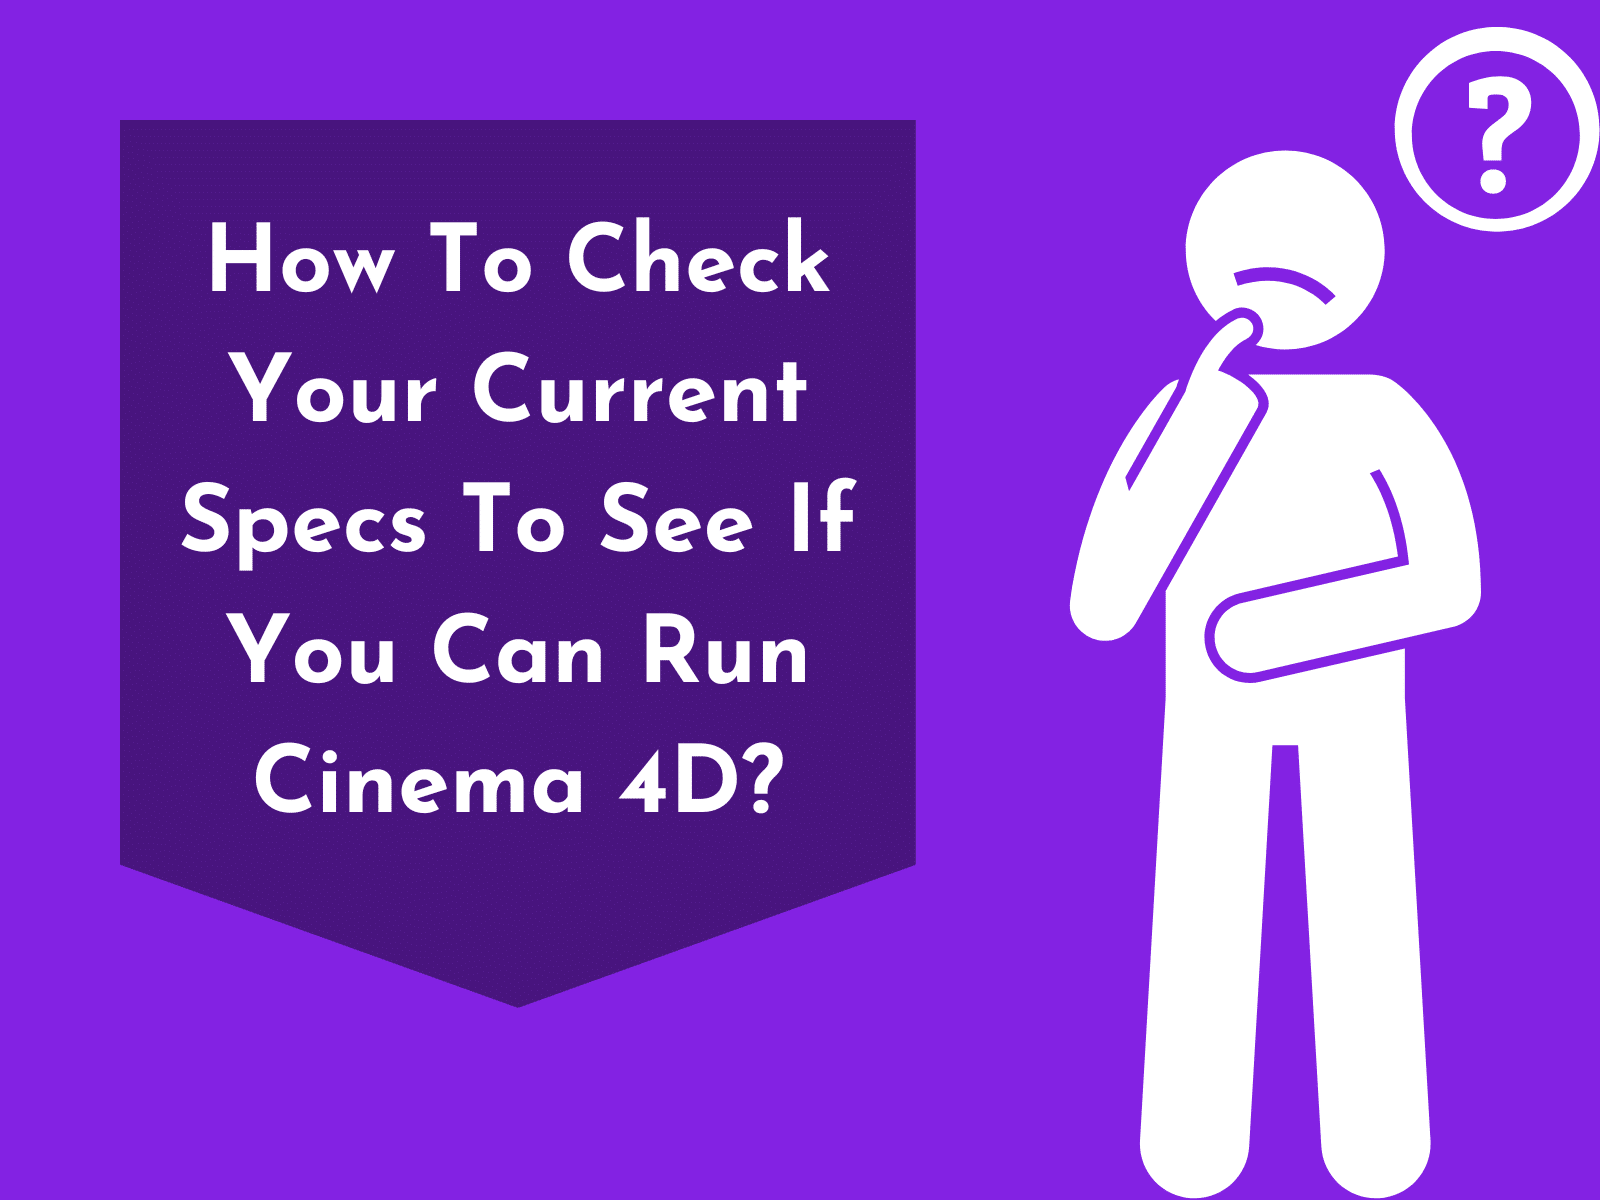 Learn How To Check Your Current Specs To See If You Can Run Cinema 4D